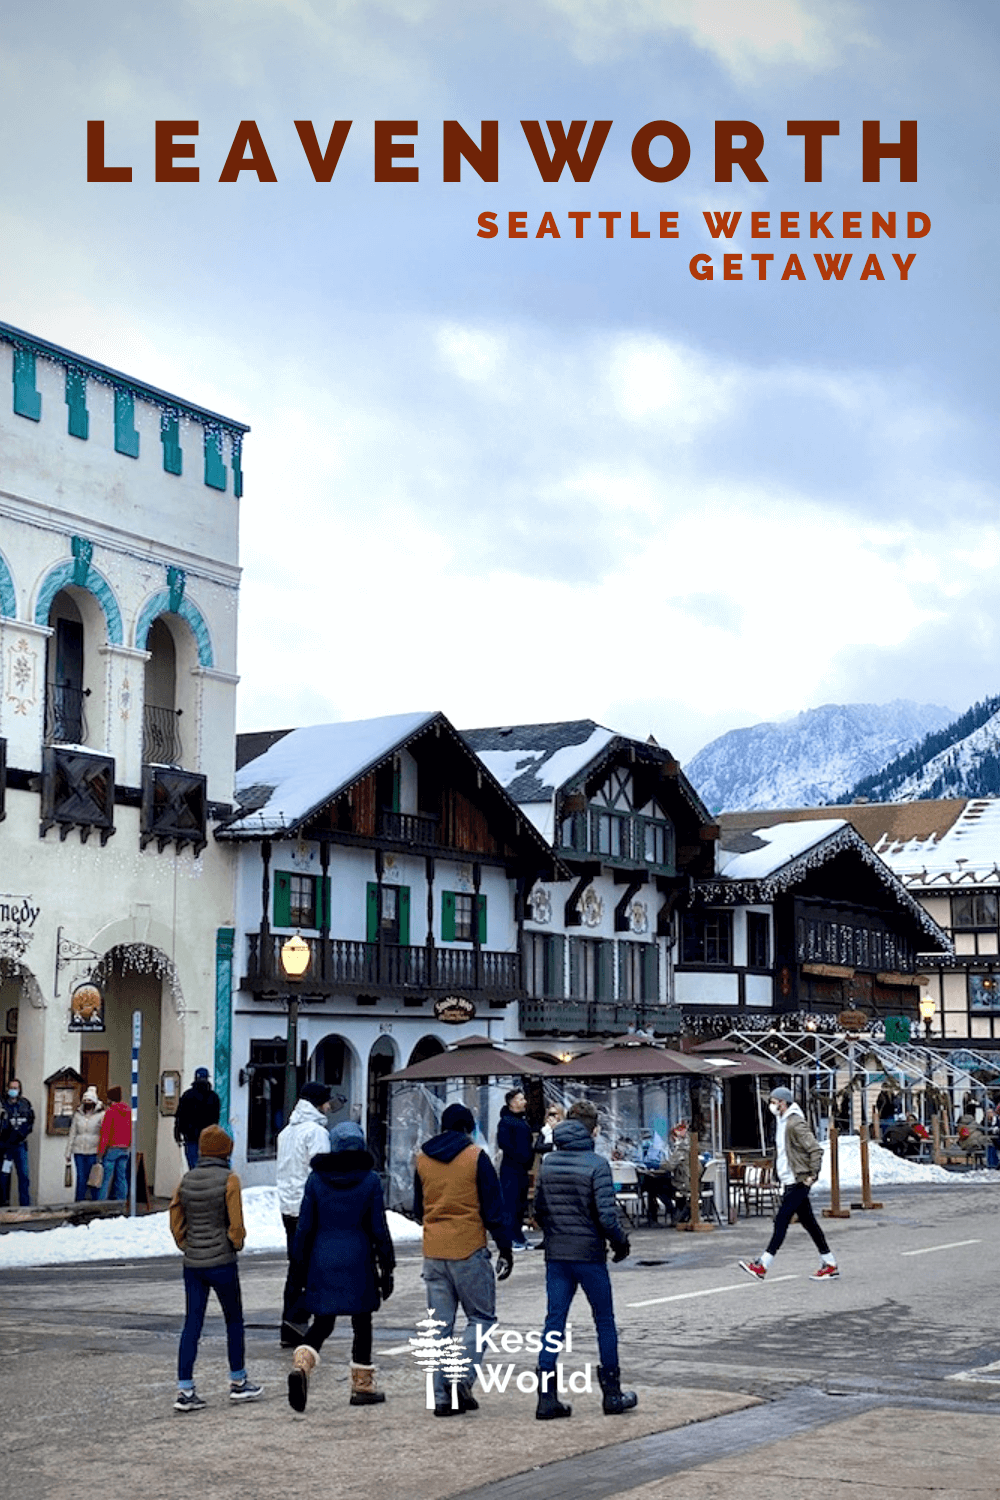 This Pinterest pin depicts people walking in the downtown core of the Bavarian themed town in the Cascade Mountains on a Seattle weekend getaway to Leavenworth, Washington.  The buildings are all German in theme and still covered in holiday lights.  